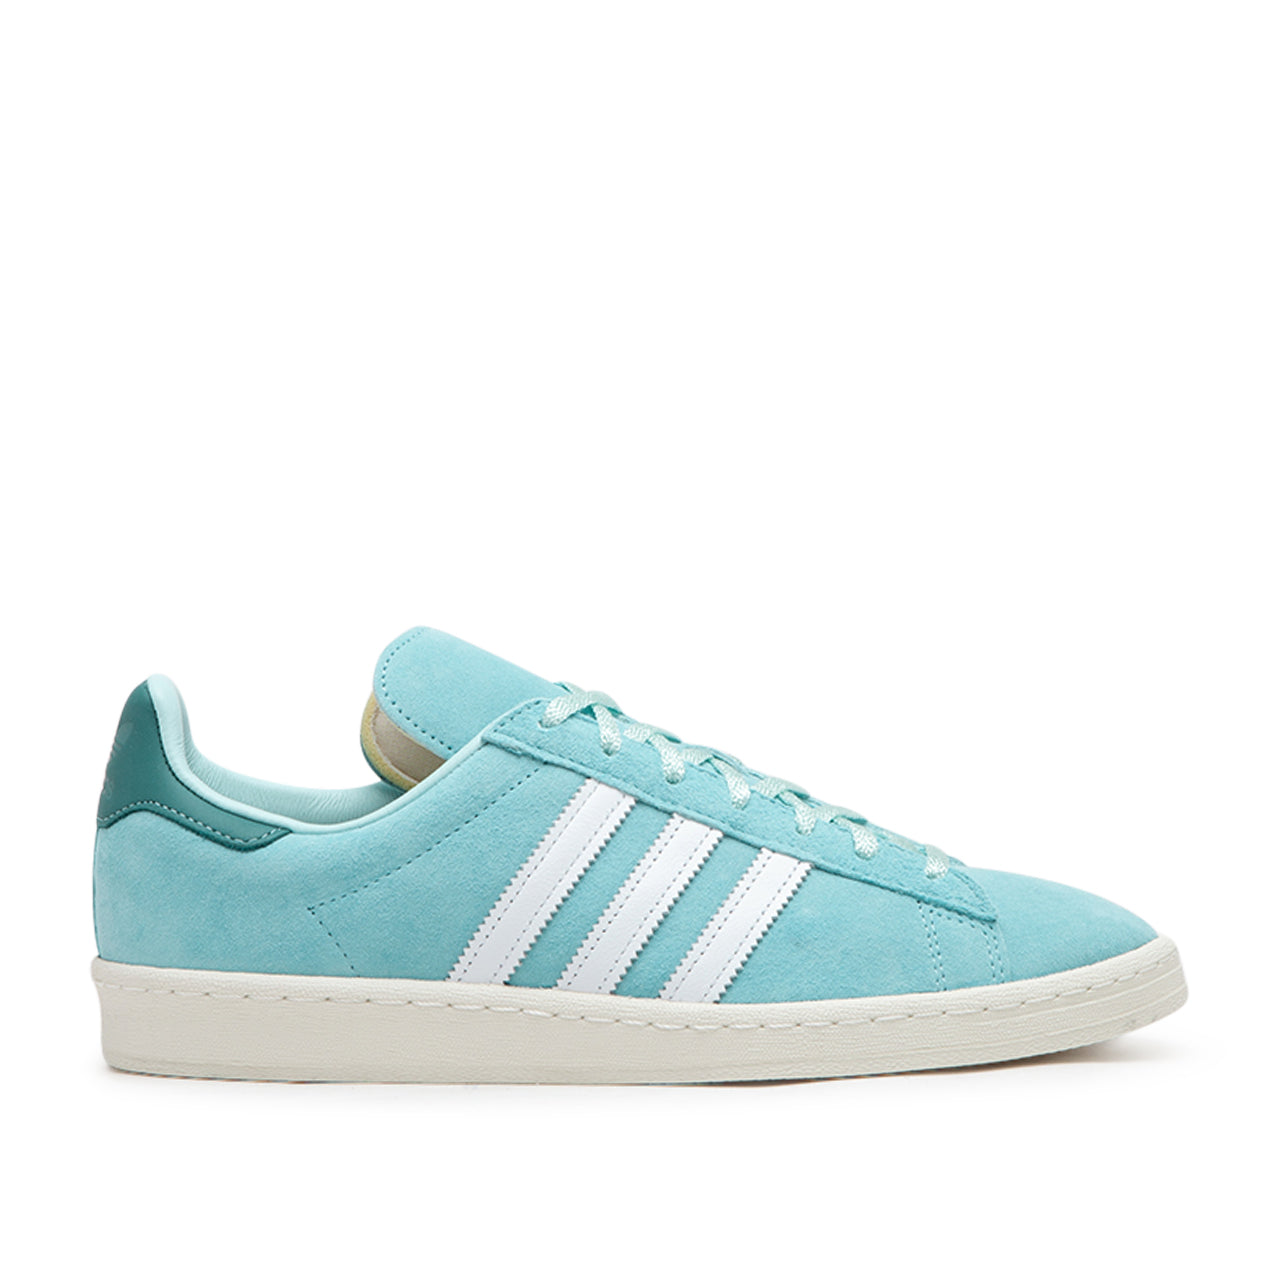 aanval Betrokken zoon adidas Campus 80s (Turquoise / White) IF5336 - Allike Store